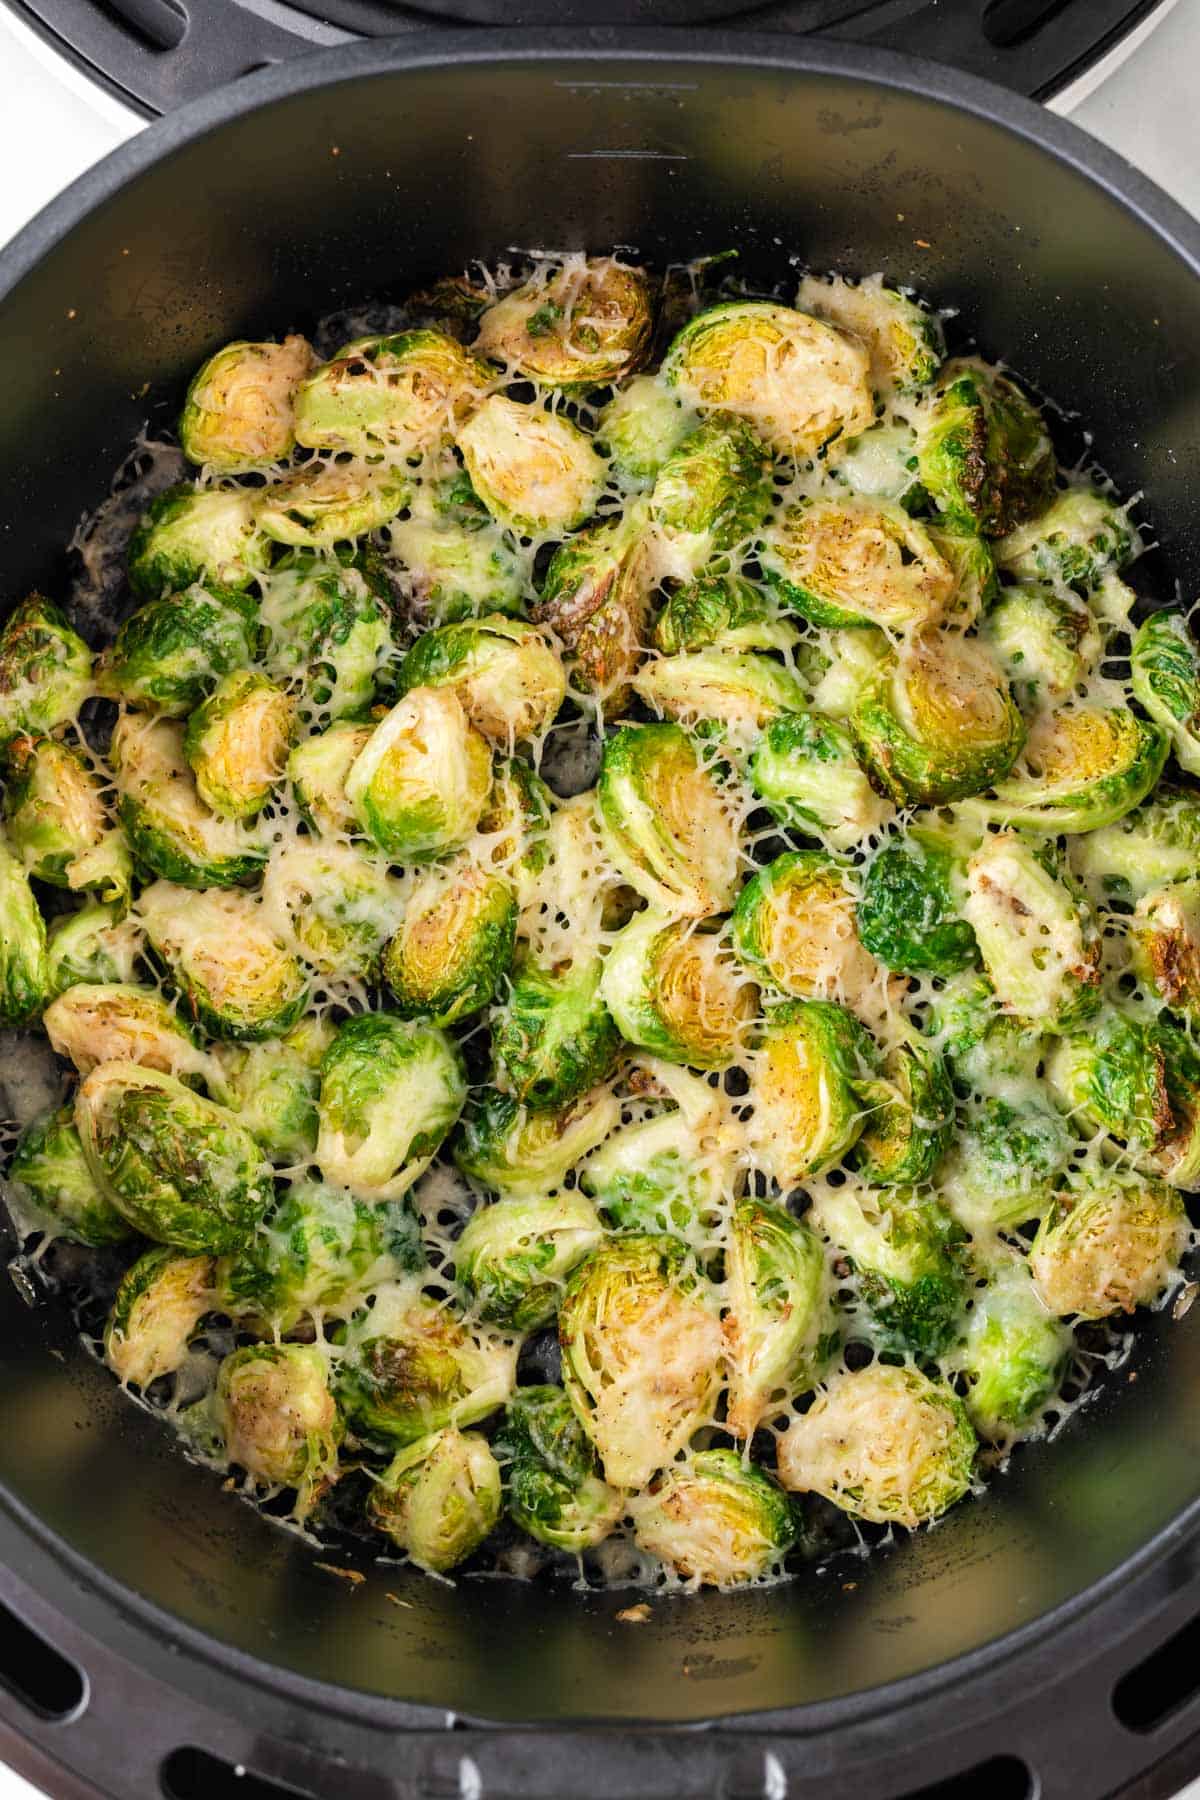 crispy brussels sprouts in the air fryer basket